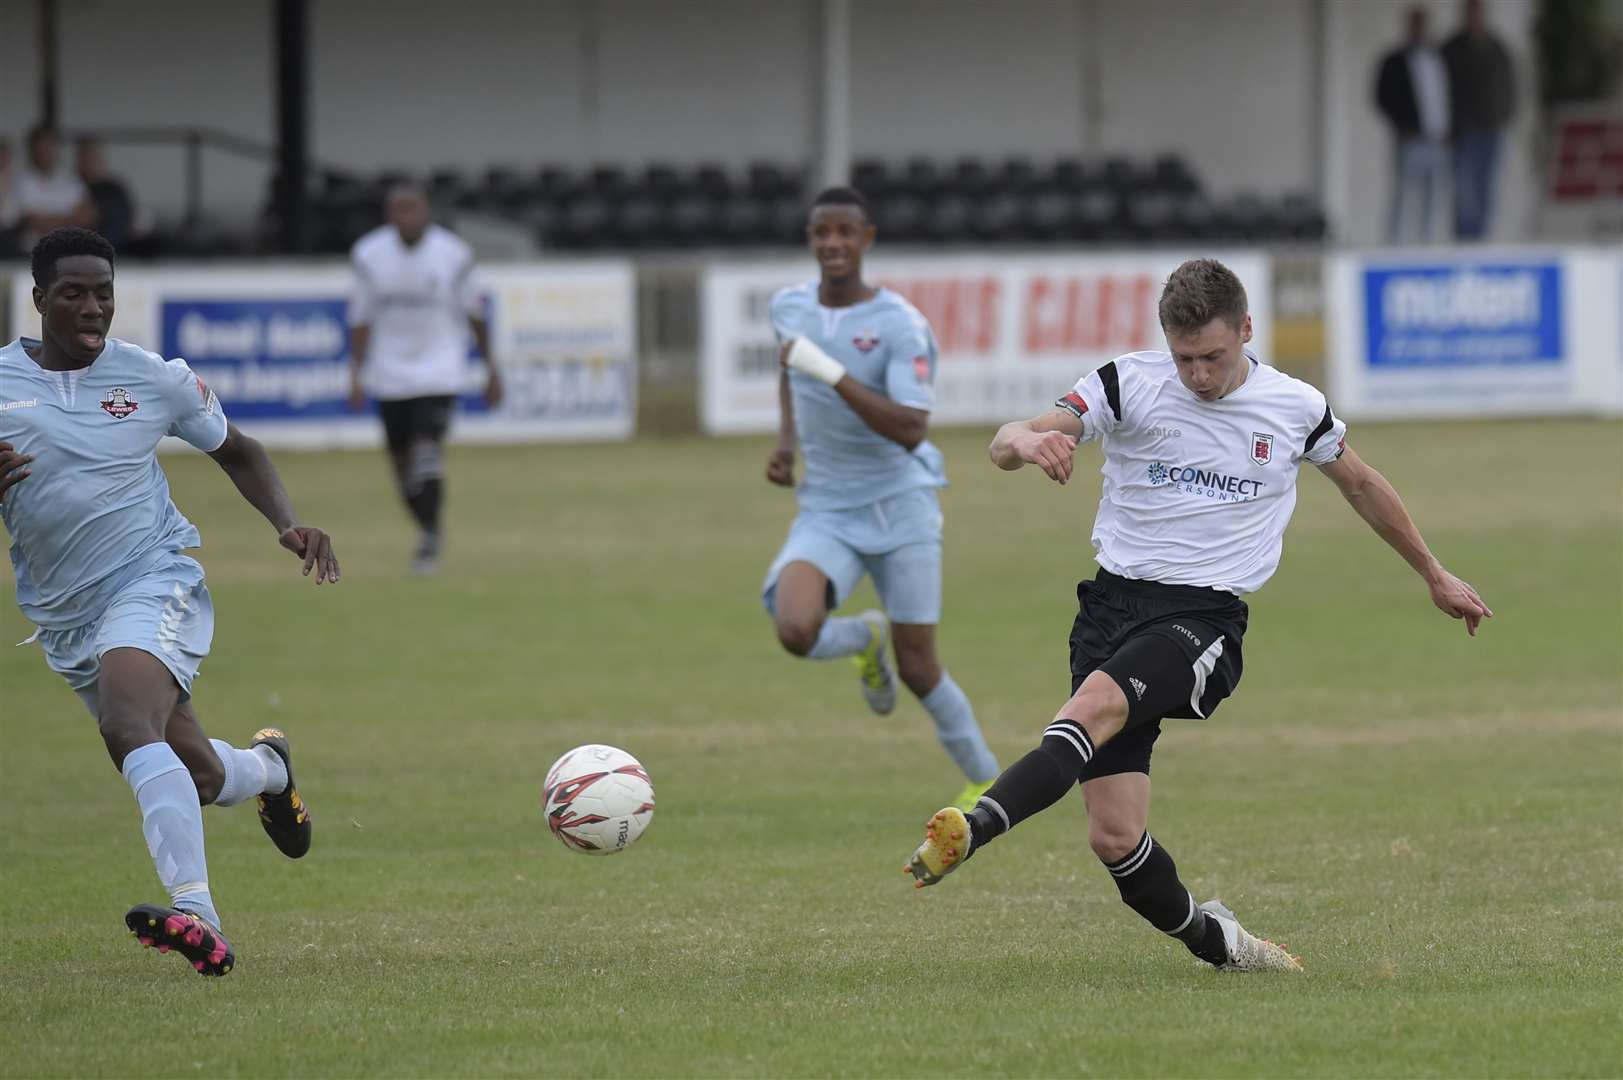 Sam Bewick playing for one of his former teams Faversham Town Picture: Tony Flashman